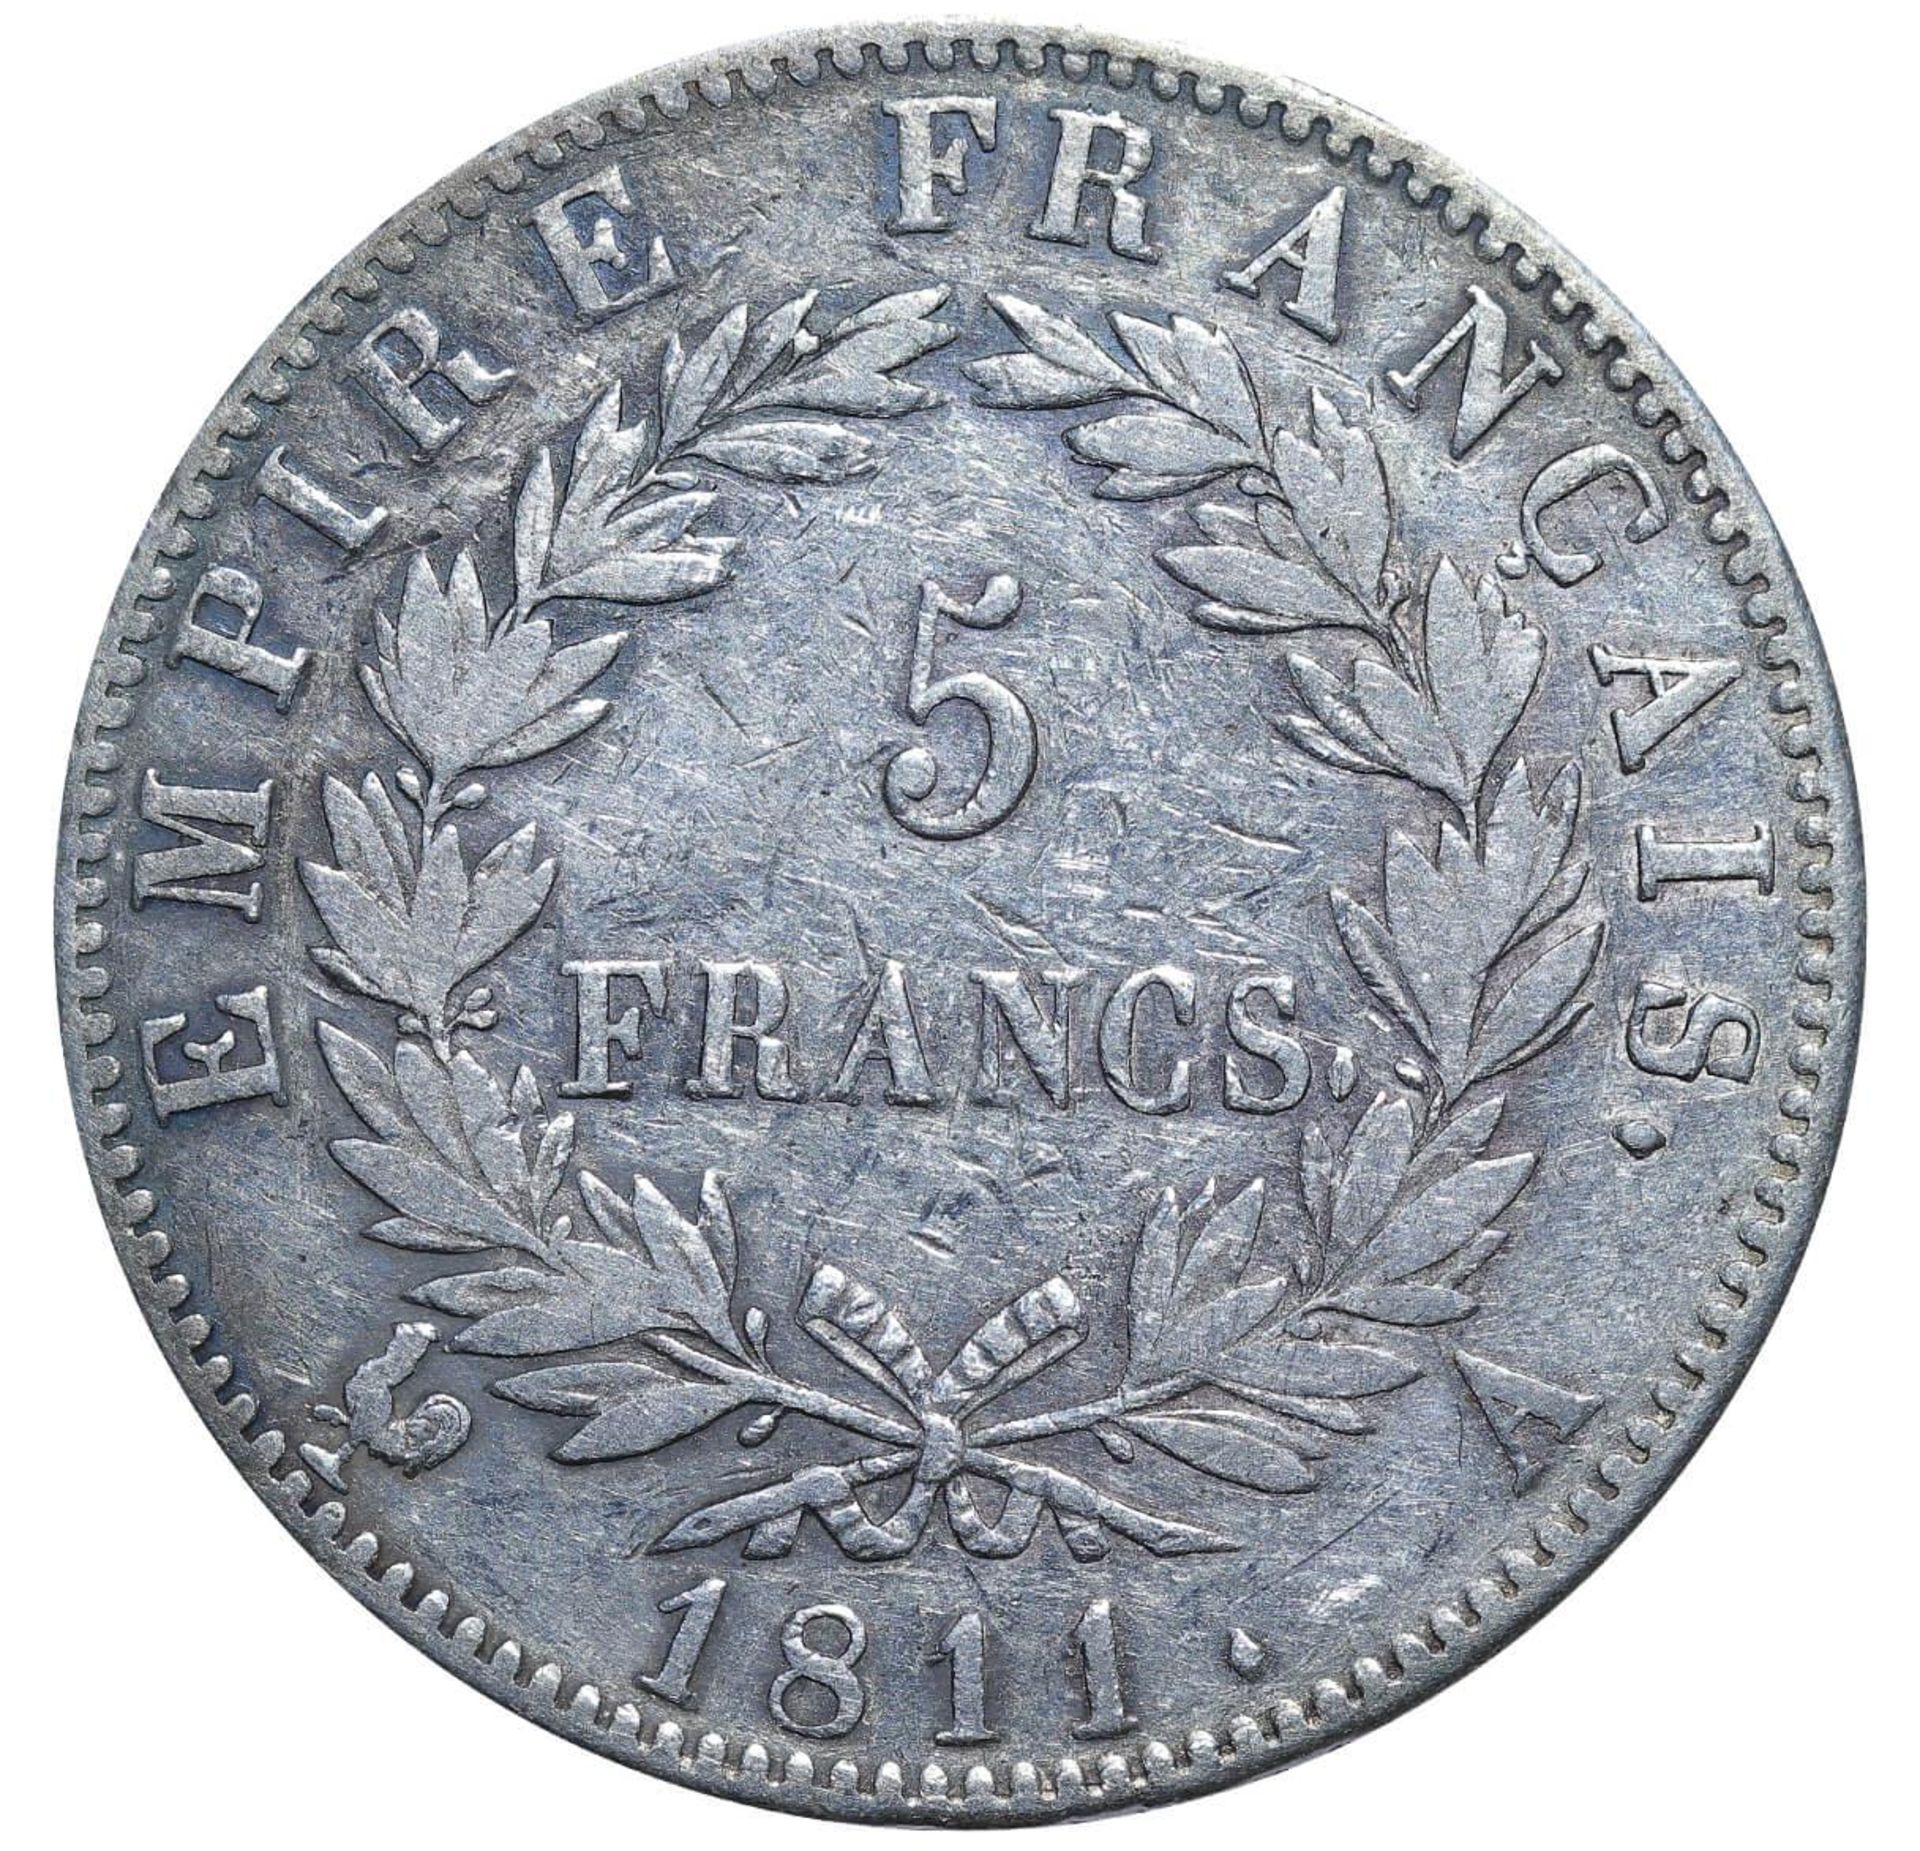 France, 5 Francs, 1811 year, A - Image 3 of 3